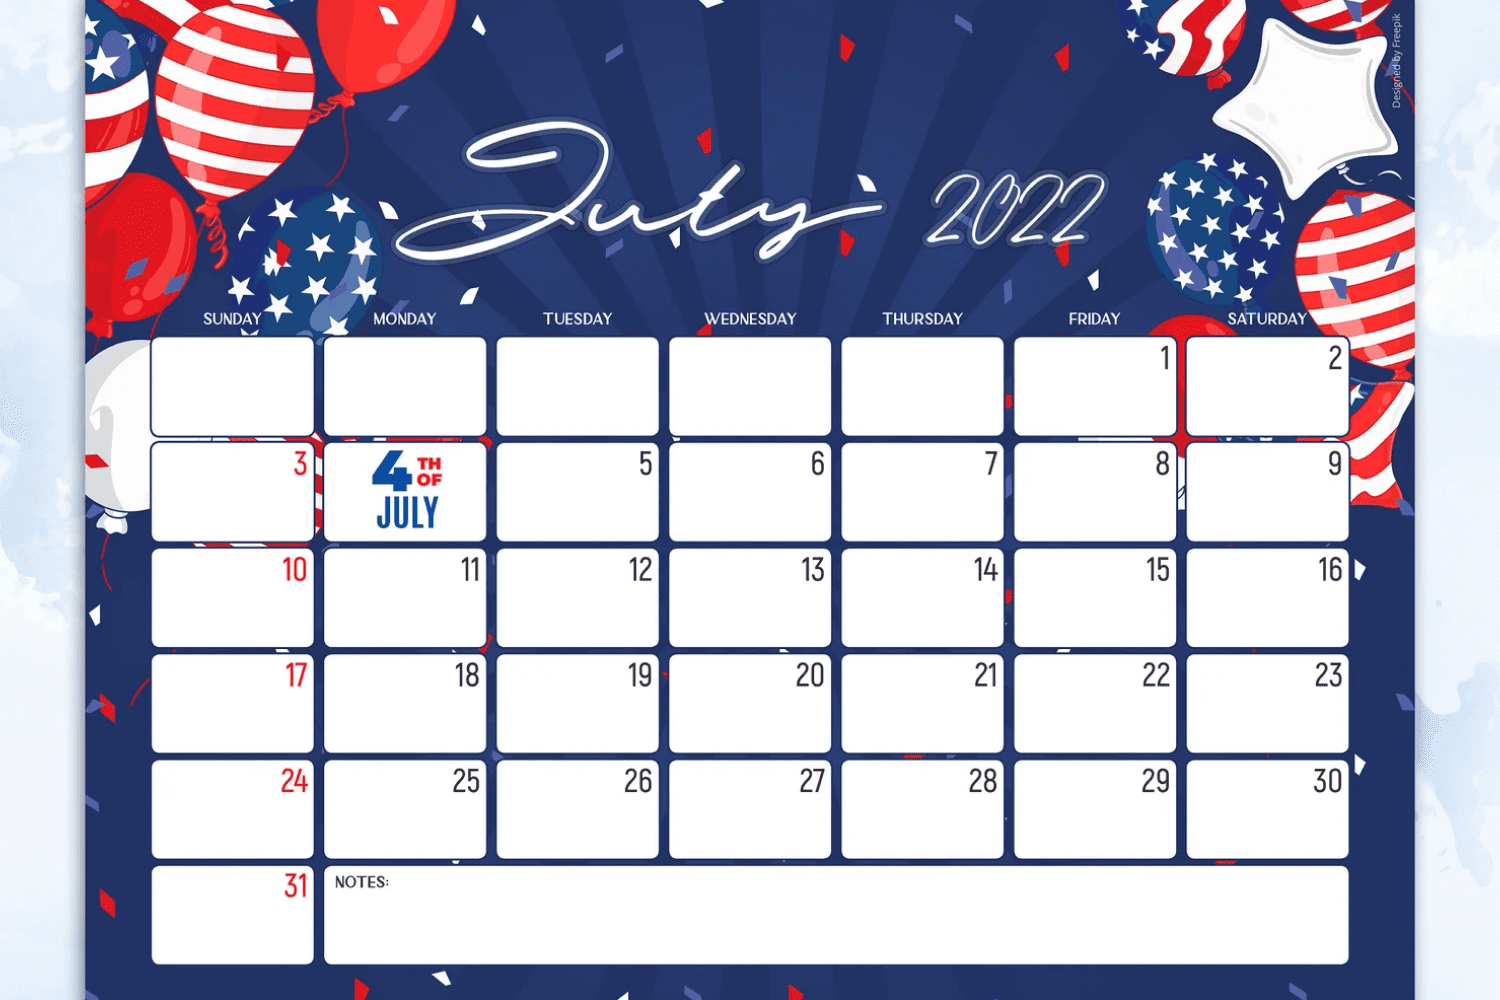 Bright calendar with balloons in the colors of the American flag.